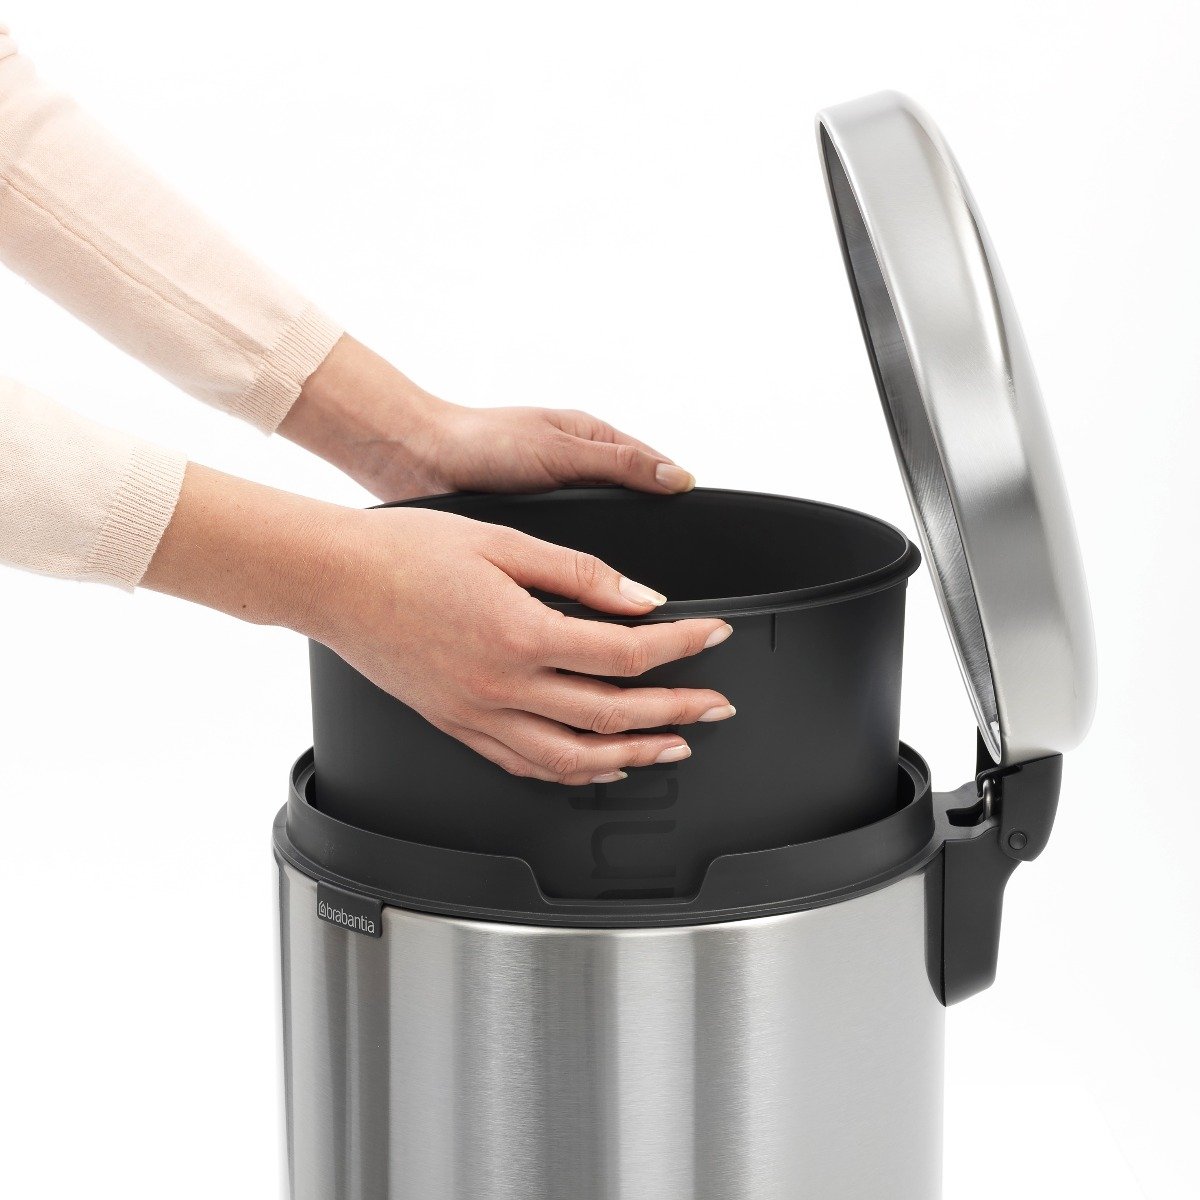 Brabantia New Icon Single Compartment 30L Kitchen Pedal Bin - Brilliant Stainless Steel